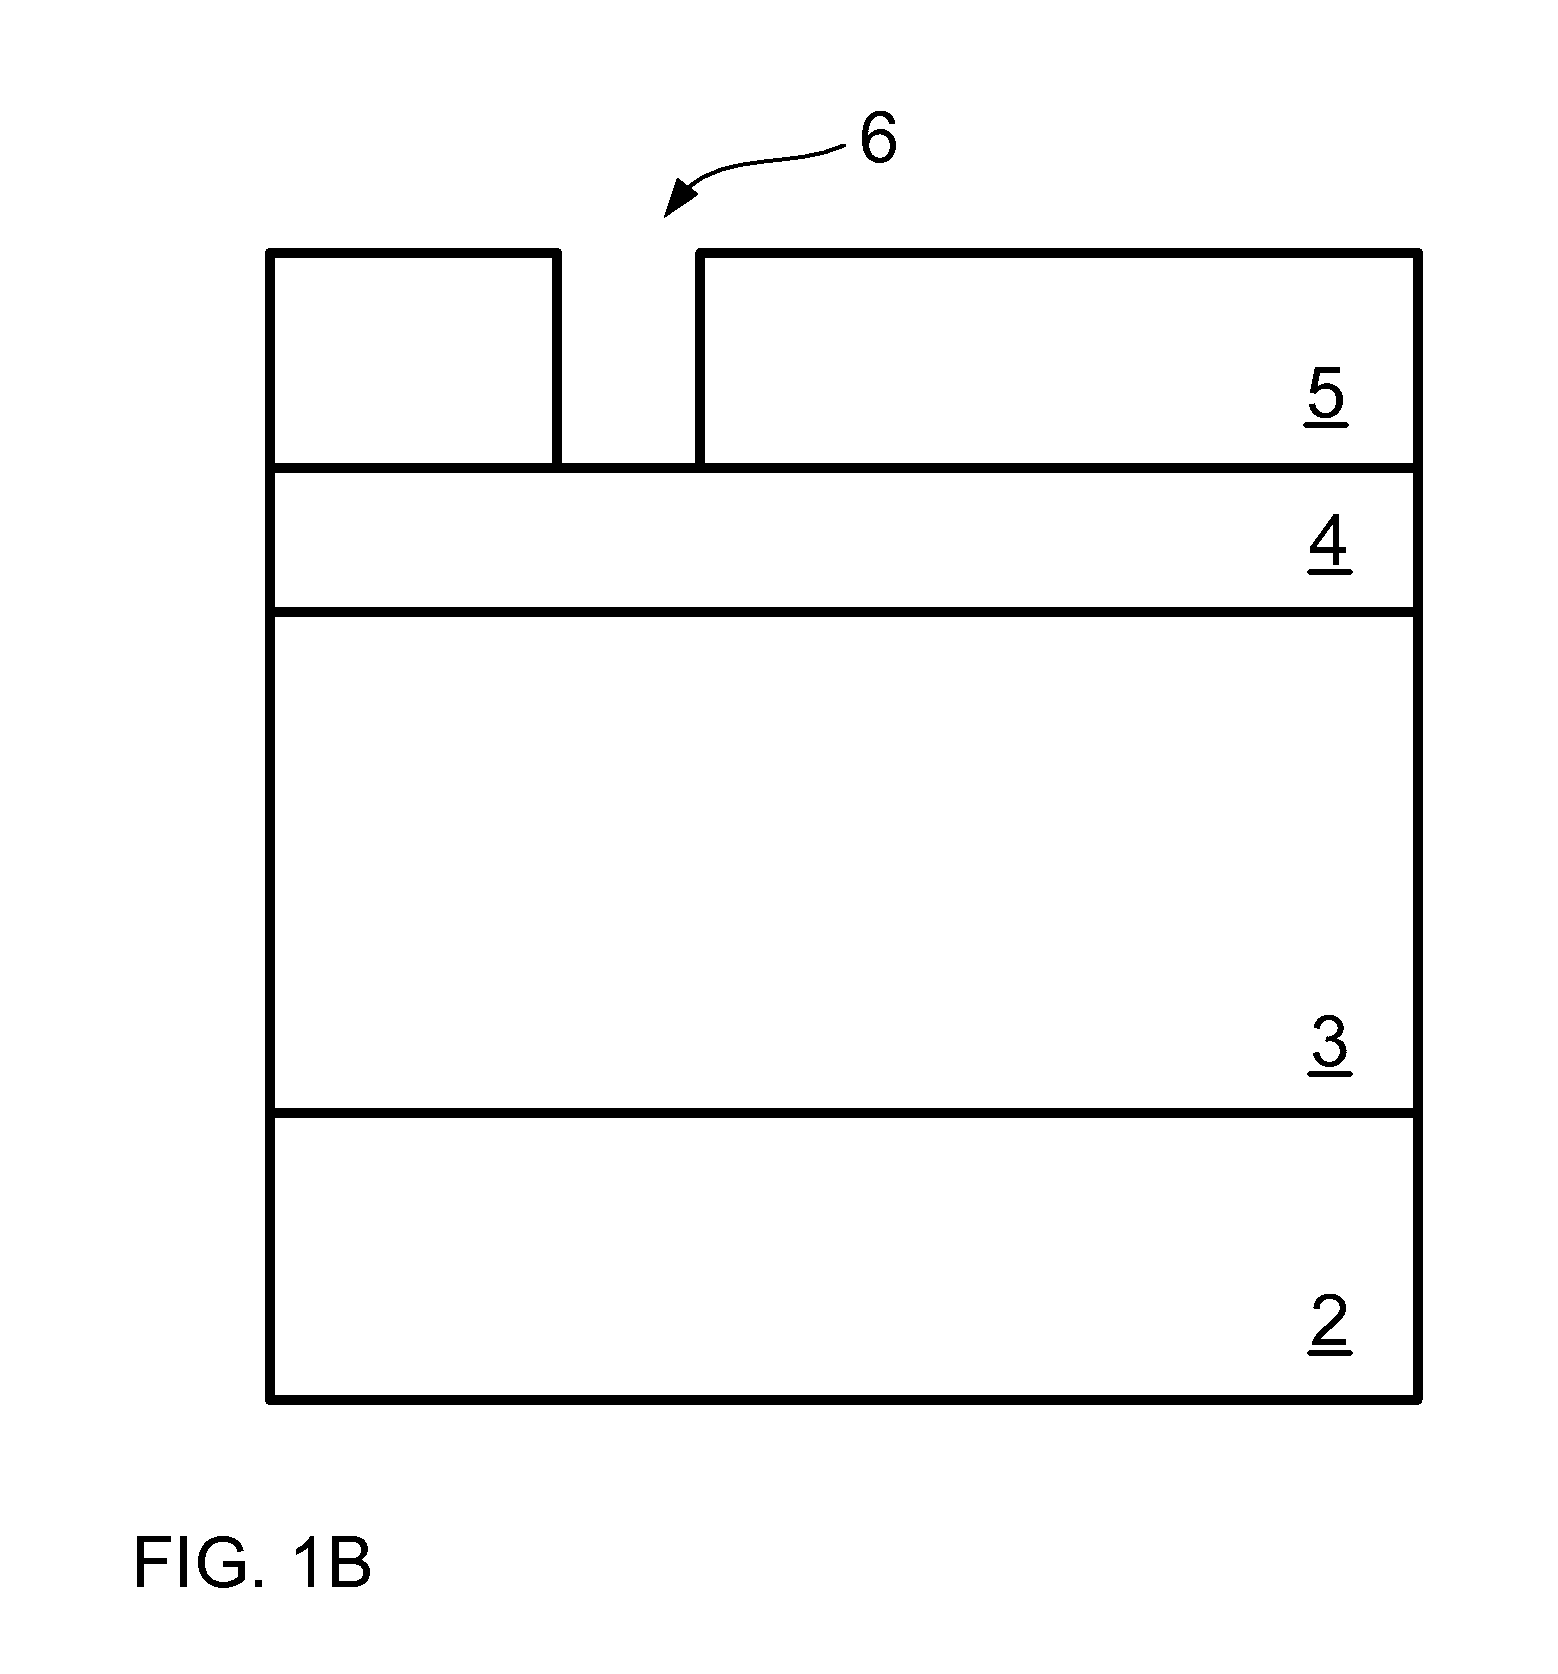 Method for metallizing a pattern in a dielectric film